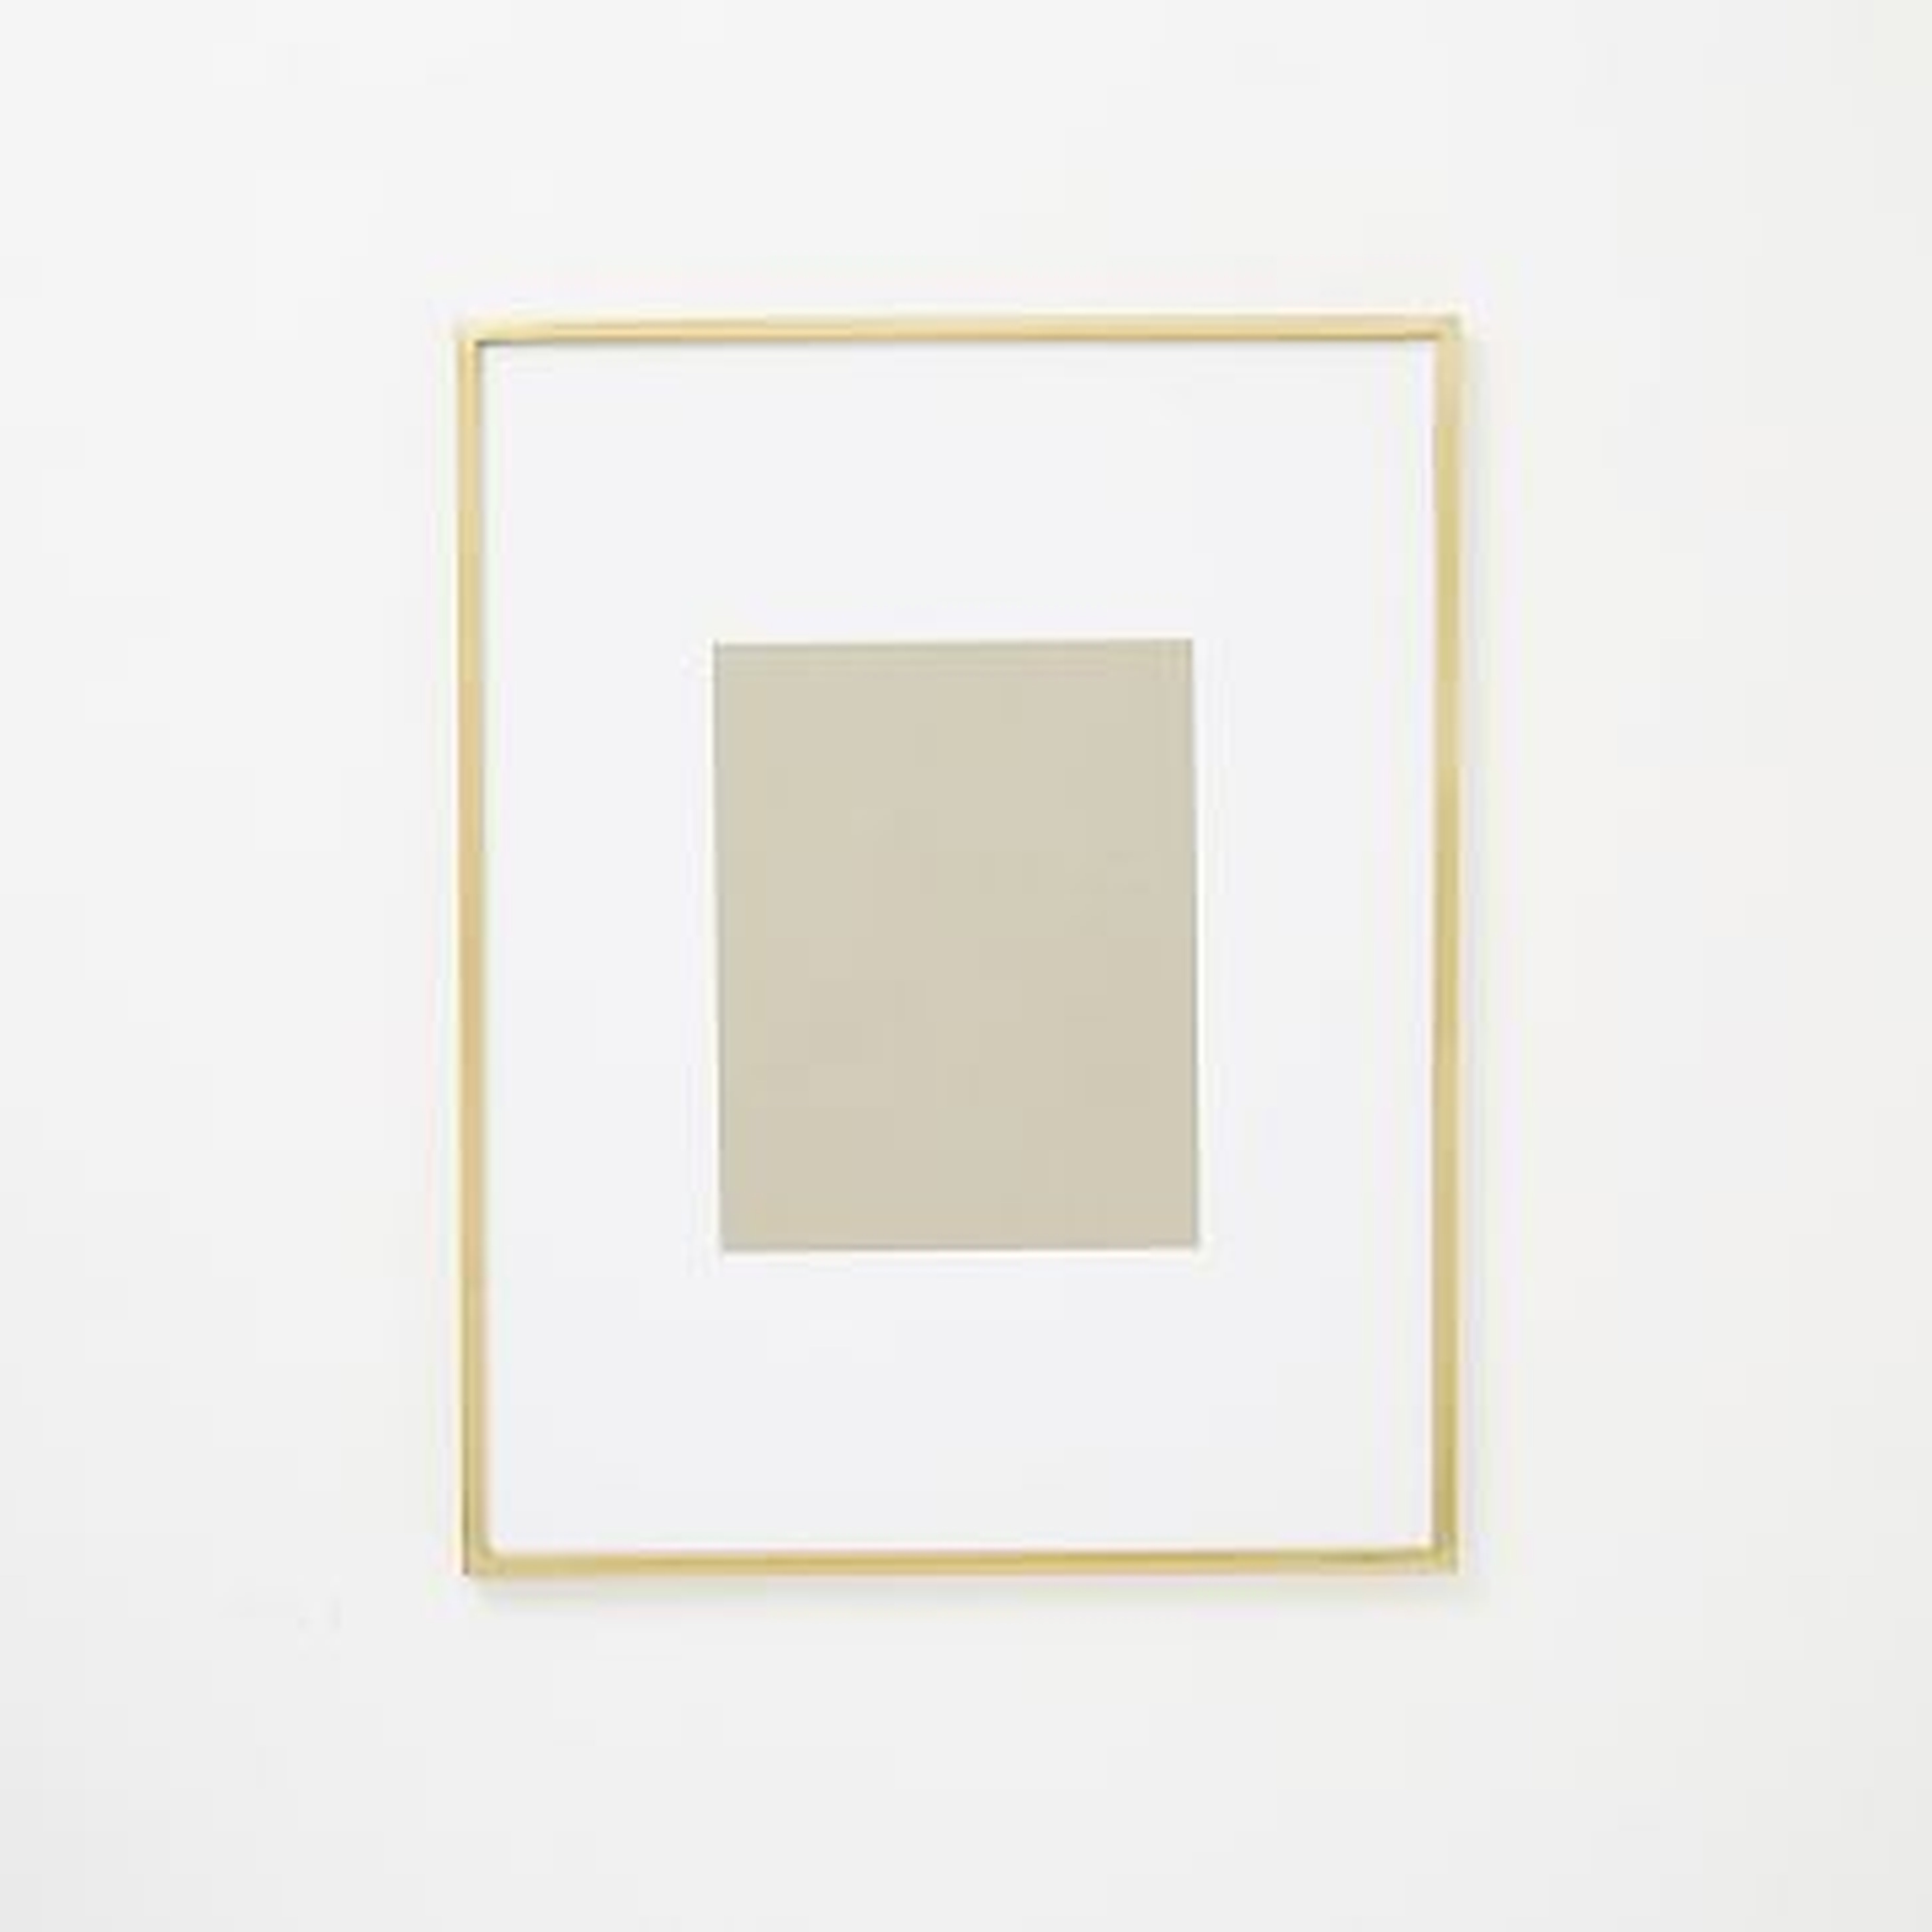 Gallery Frame, Polished Brass, 8"x10" (15" x 19" without mat) - West Elm